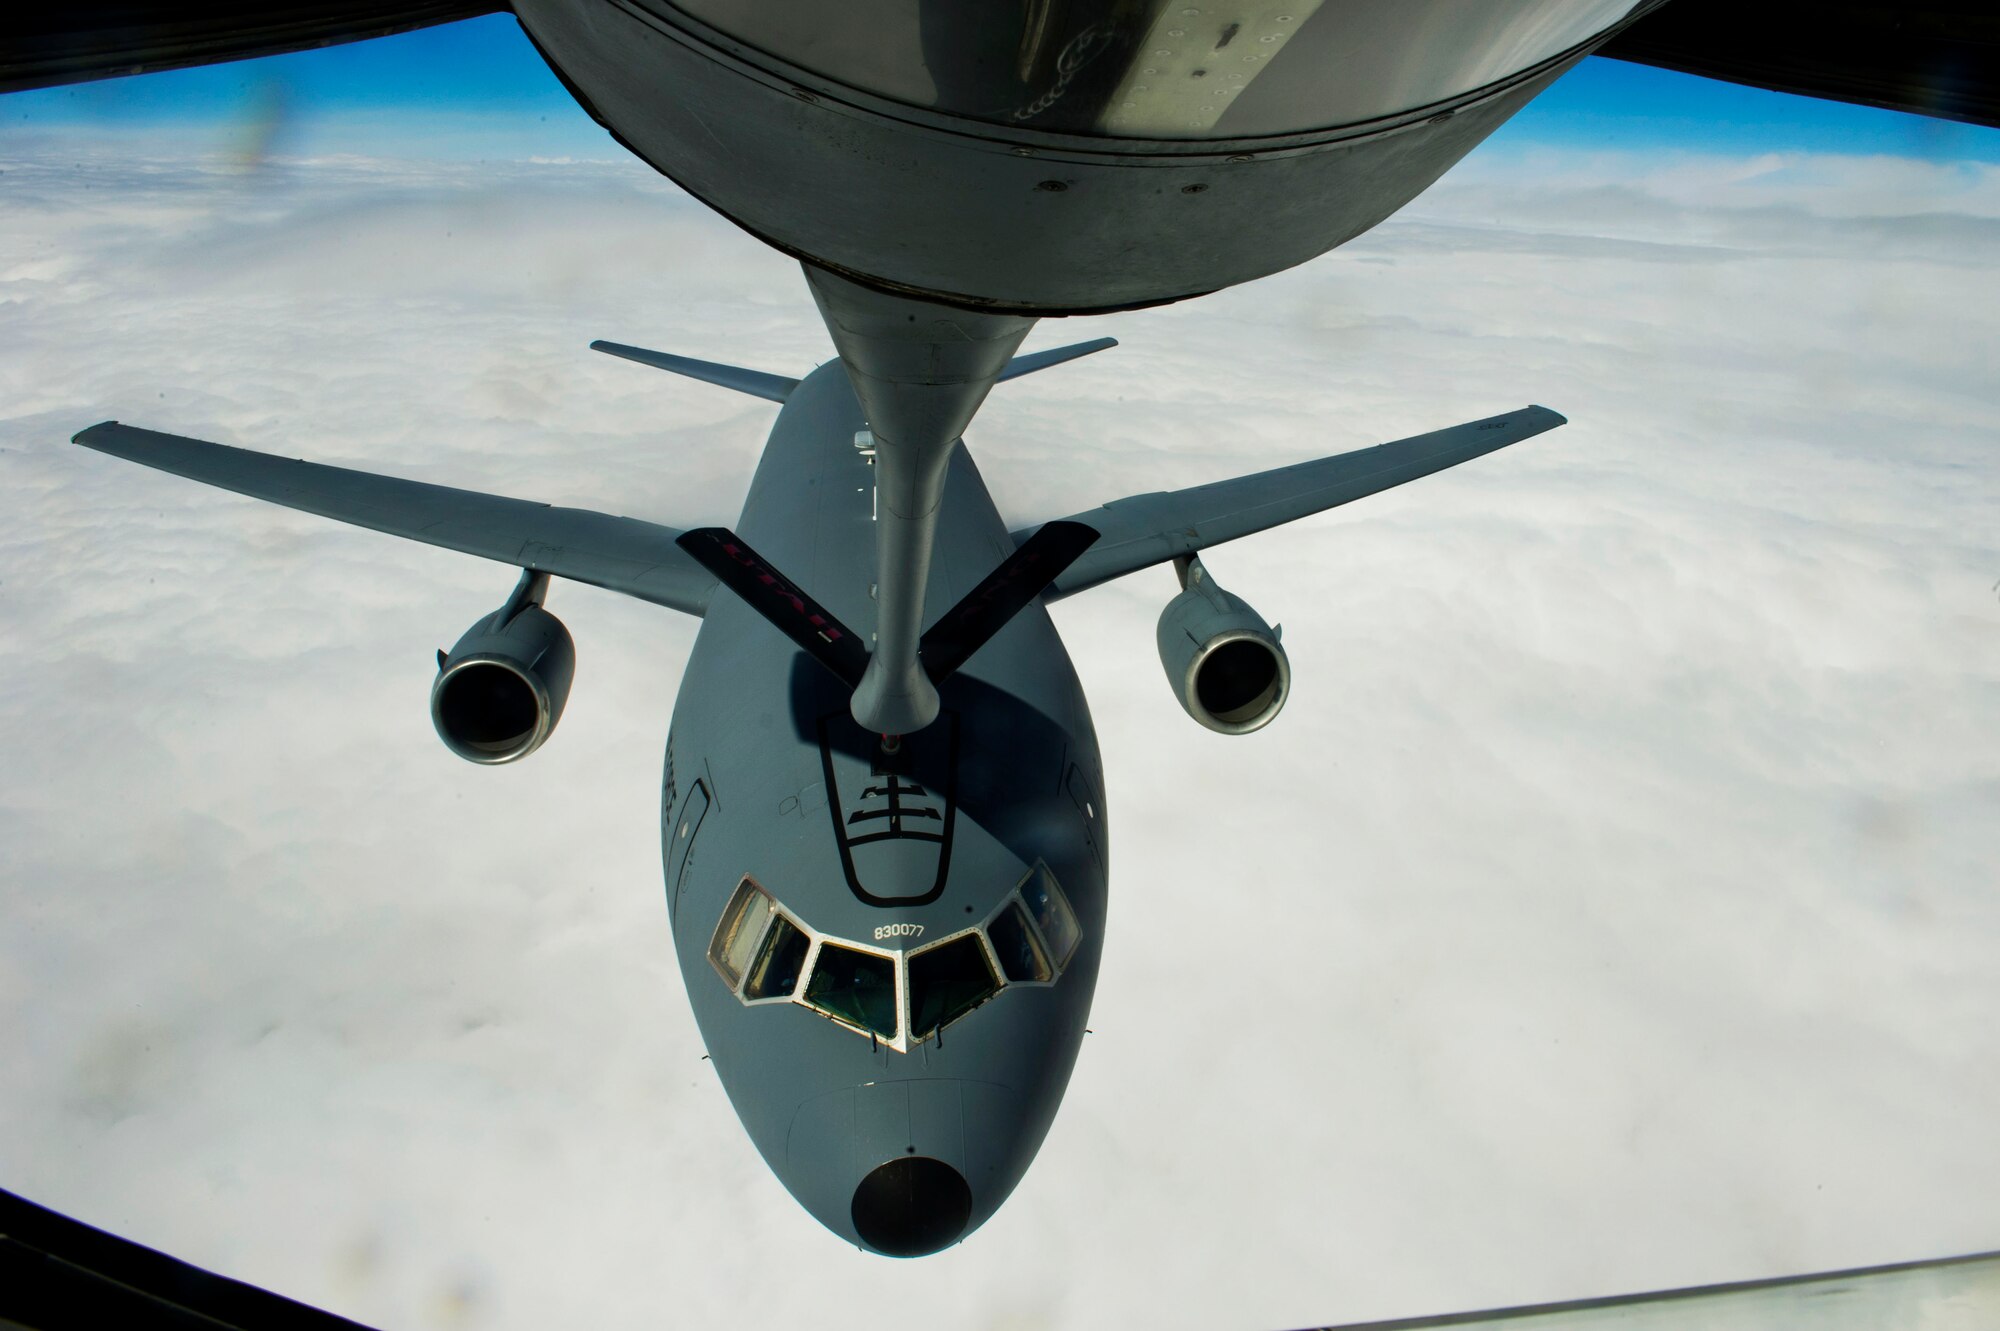 A KC-10A Extender, from the 349th Air Mobility Reserve Wing, Travis Air Force Base, Calif., gets refueled from a KC-135 Stratotanker, from the 151st Air Fueling Wing, Utah Air National Guard, April 26, 2012. The 151st Air Refueling Wing routinely supports air operations across the western United States. (U.S. Air Force photo by Staff Sgt. Stephany Richards/Released)